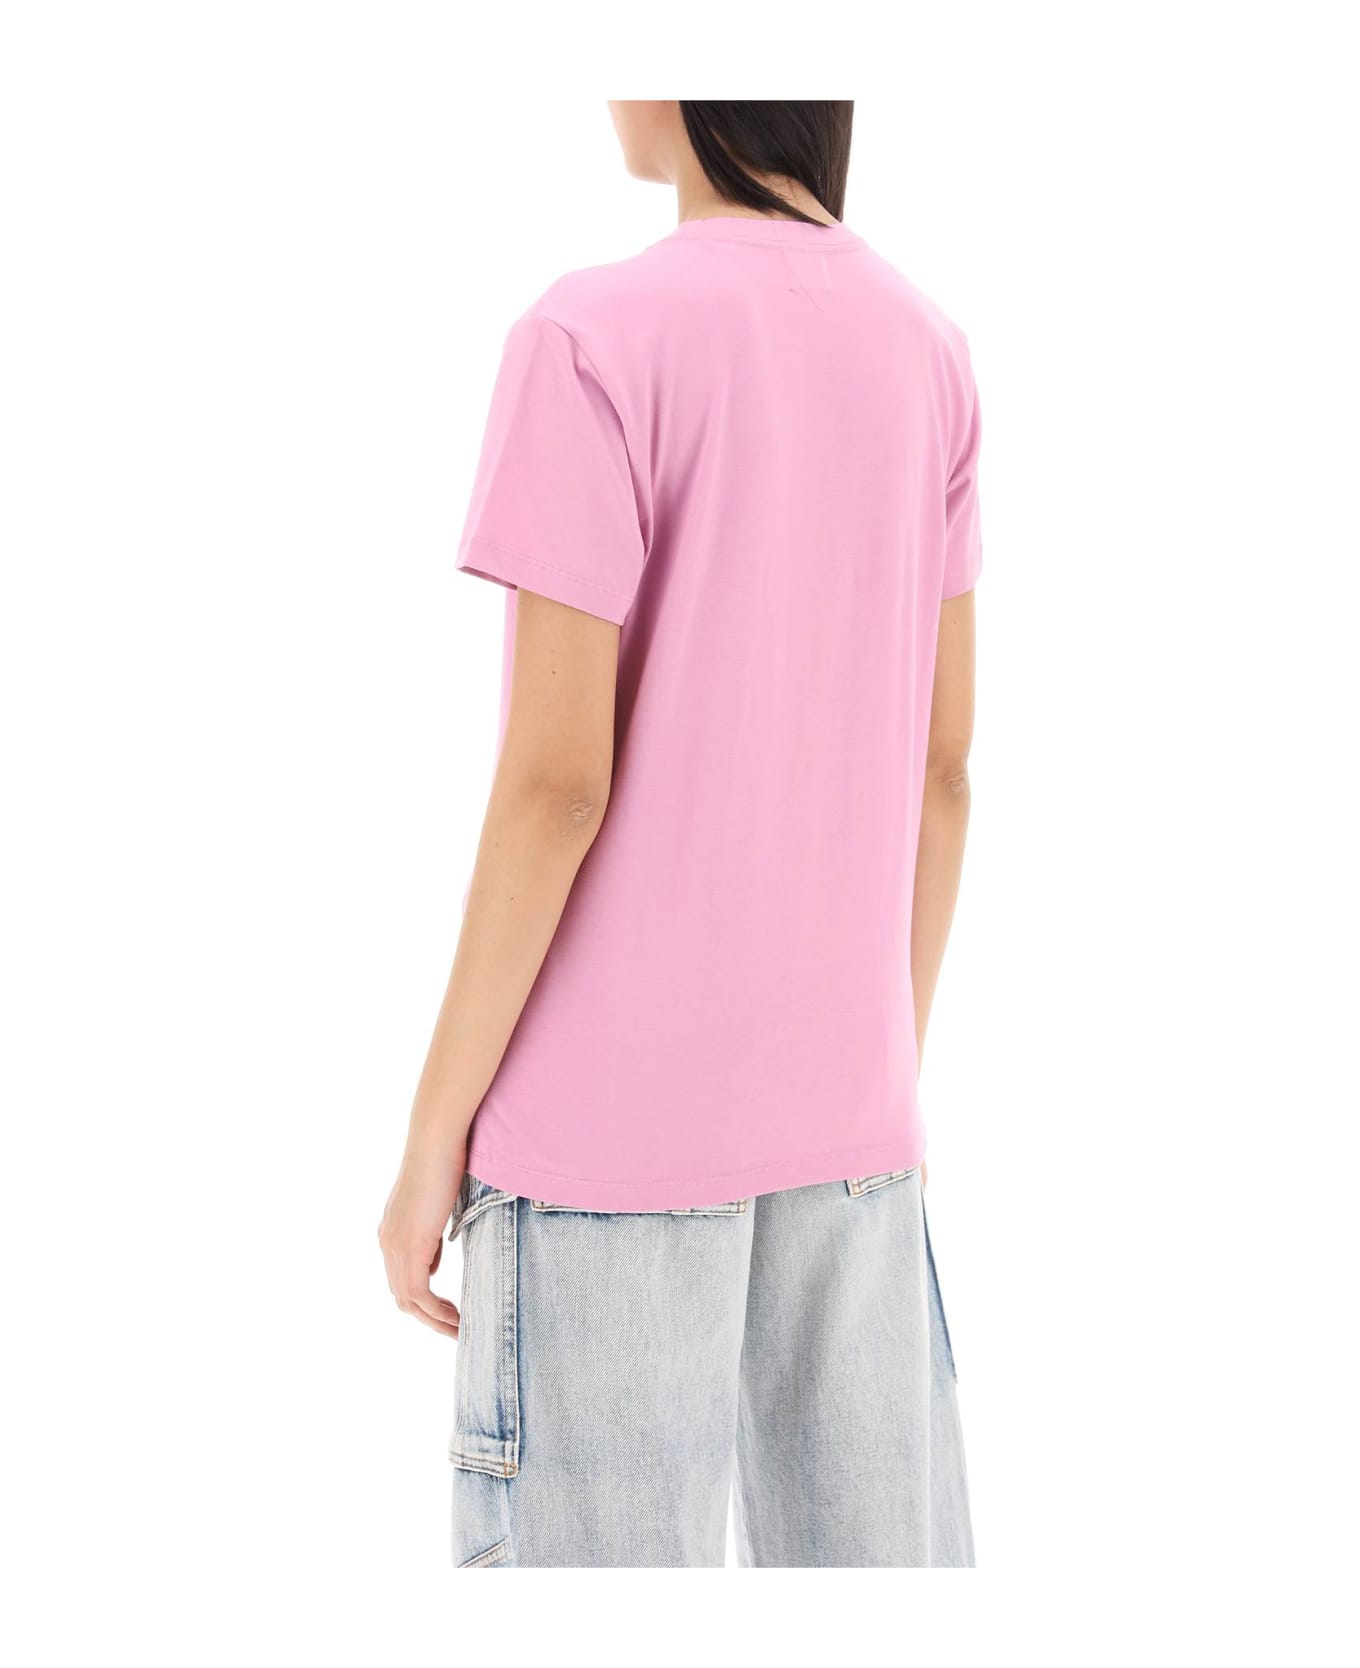 Marant Étoile Aby Regular Fit T-shirt - Candy Pink